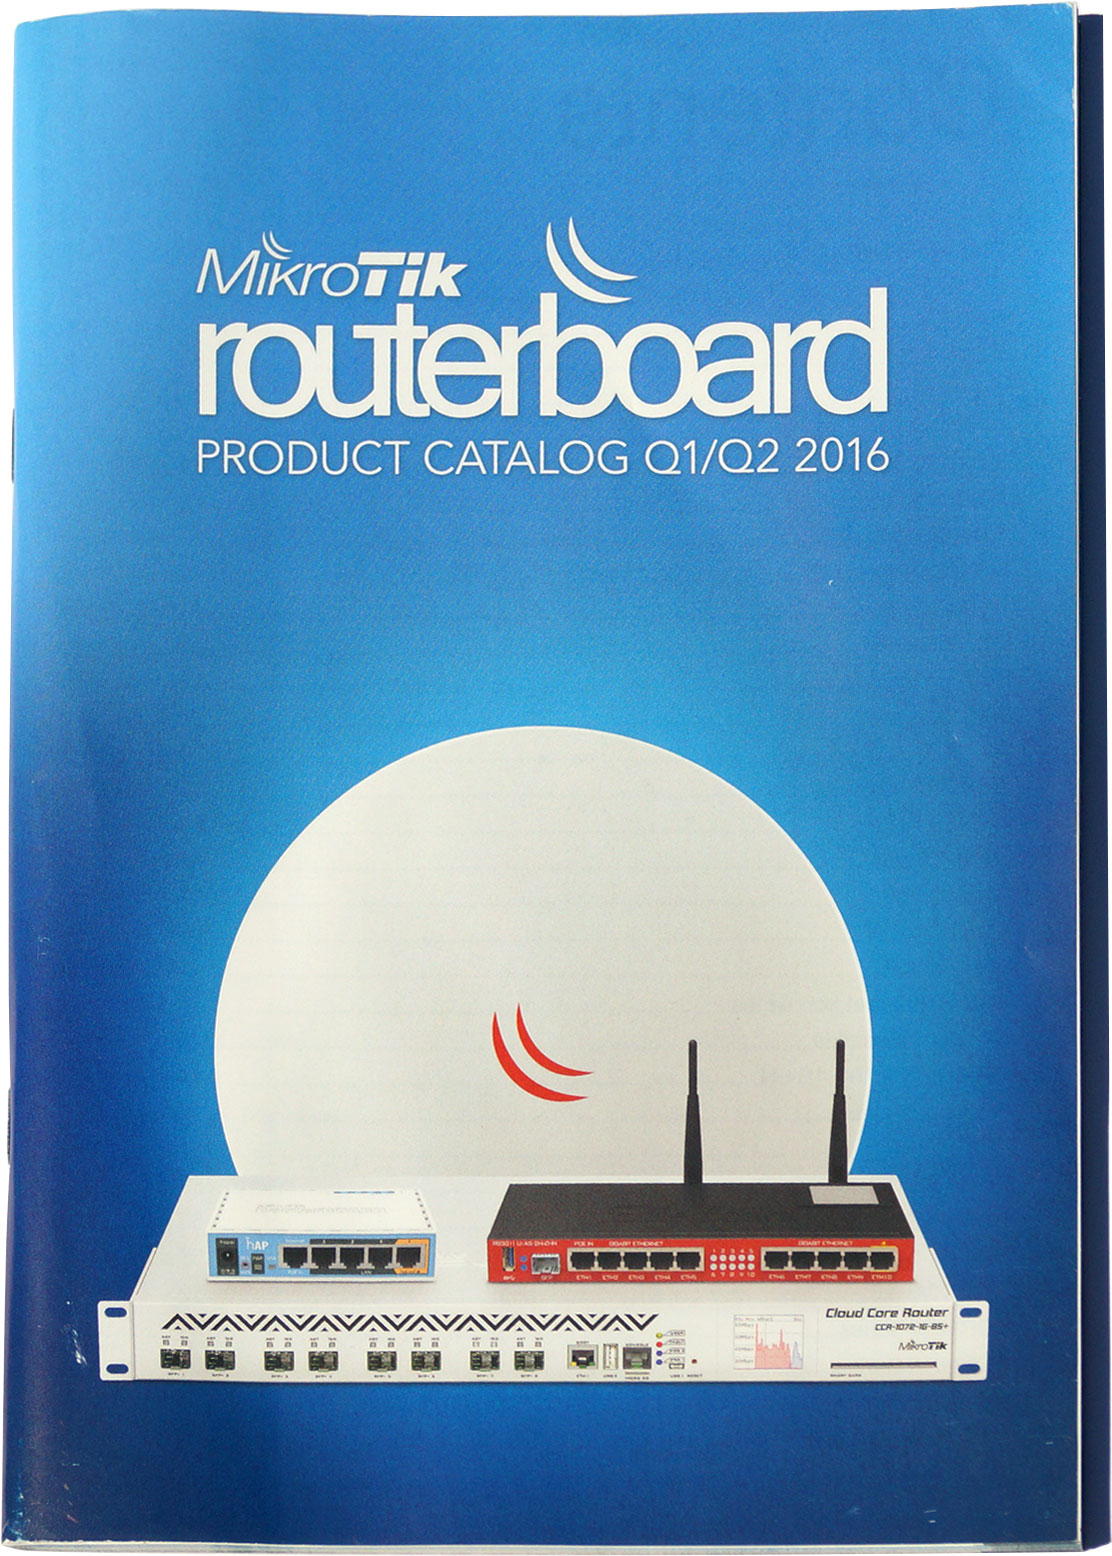 Mikrotik RouterBoard Brochure Q1/Q2-2016 Color Catalog showing all current and new Mikrotik Products